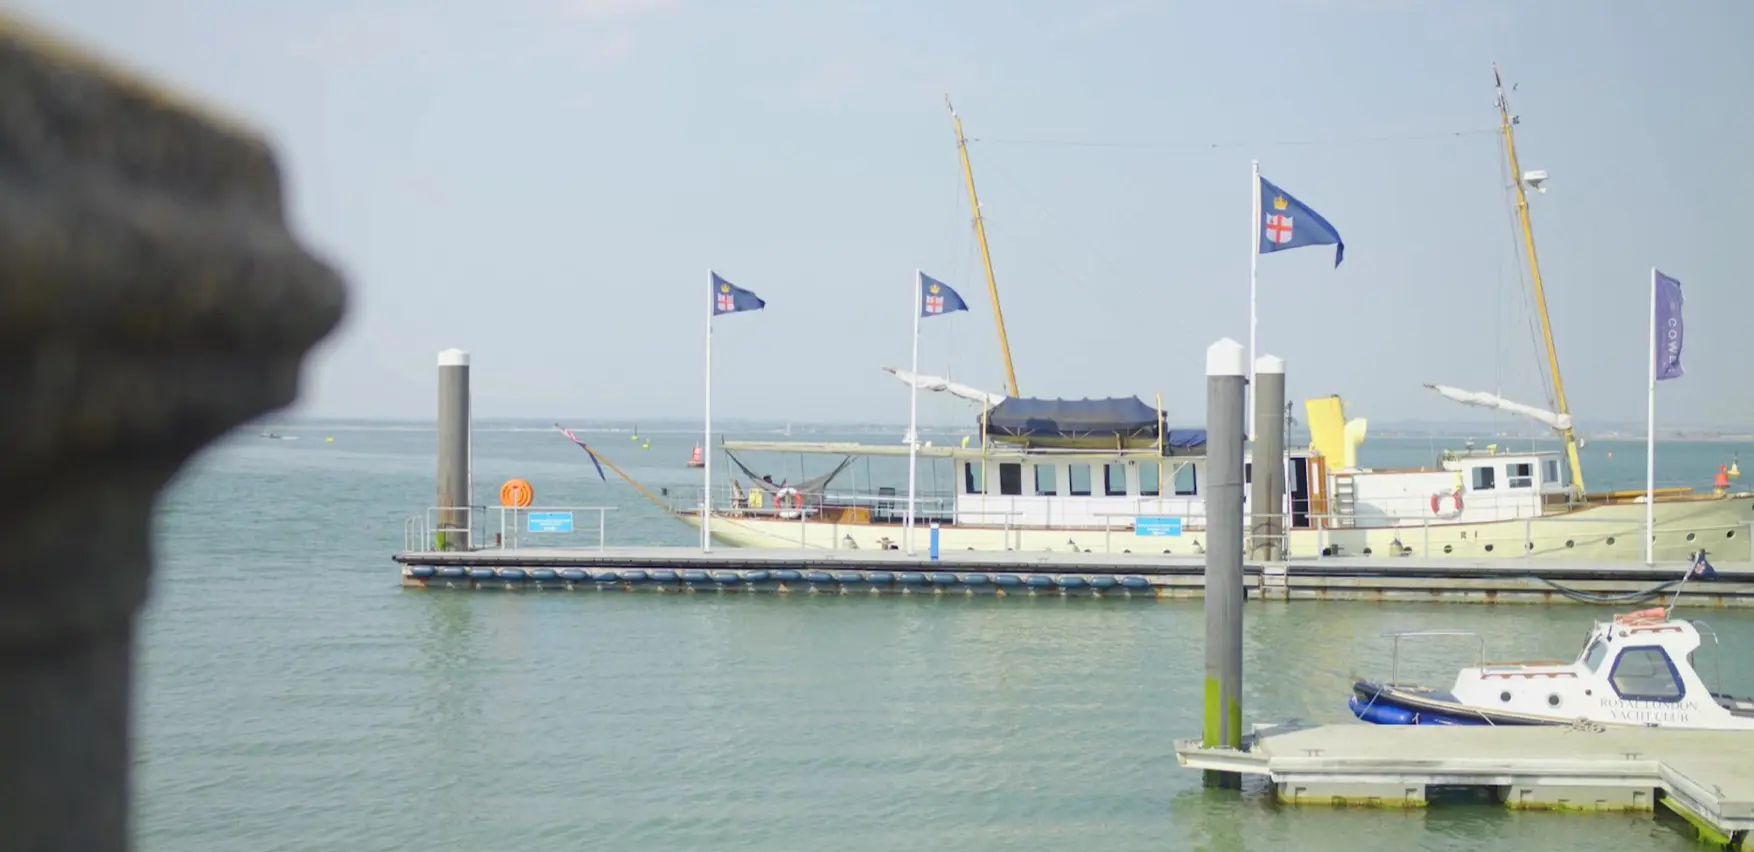 A photo of a dock on Isle of Wight with boats